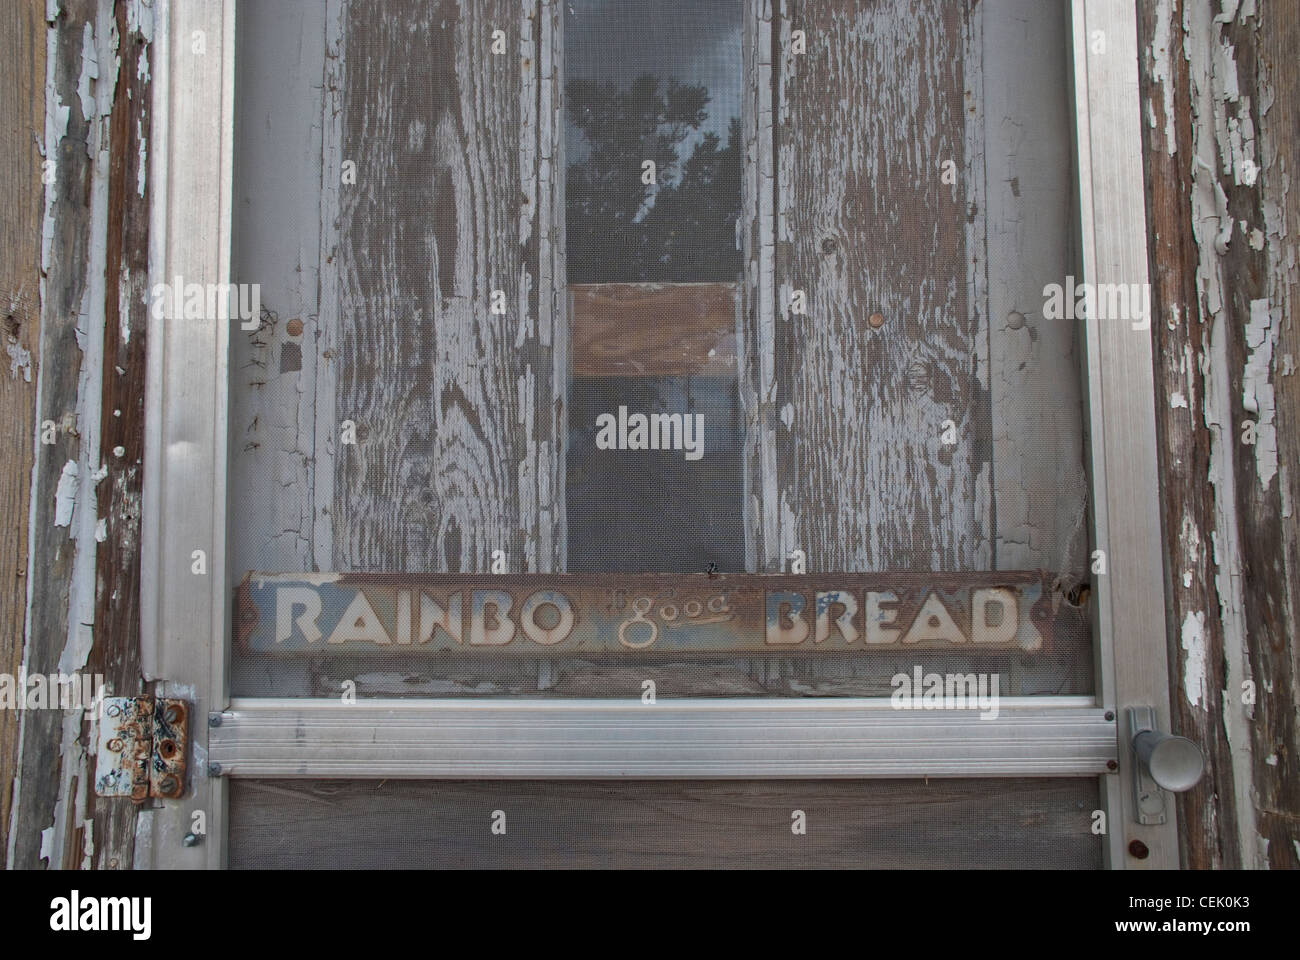 'Rainbo good Bread can still be seen on the entrance door to an old grocery store in Fort Sumner, New Mexico. Stock Photo